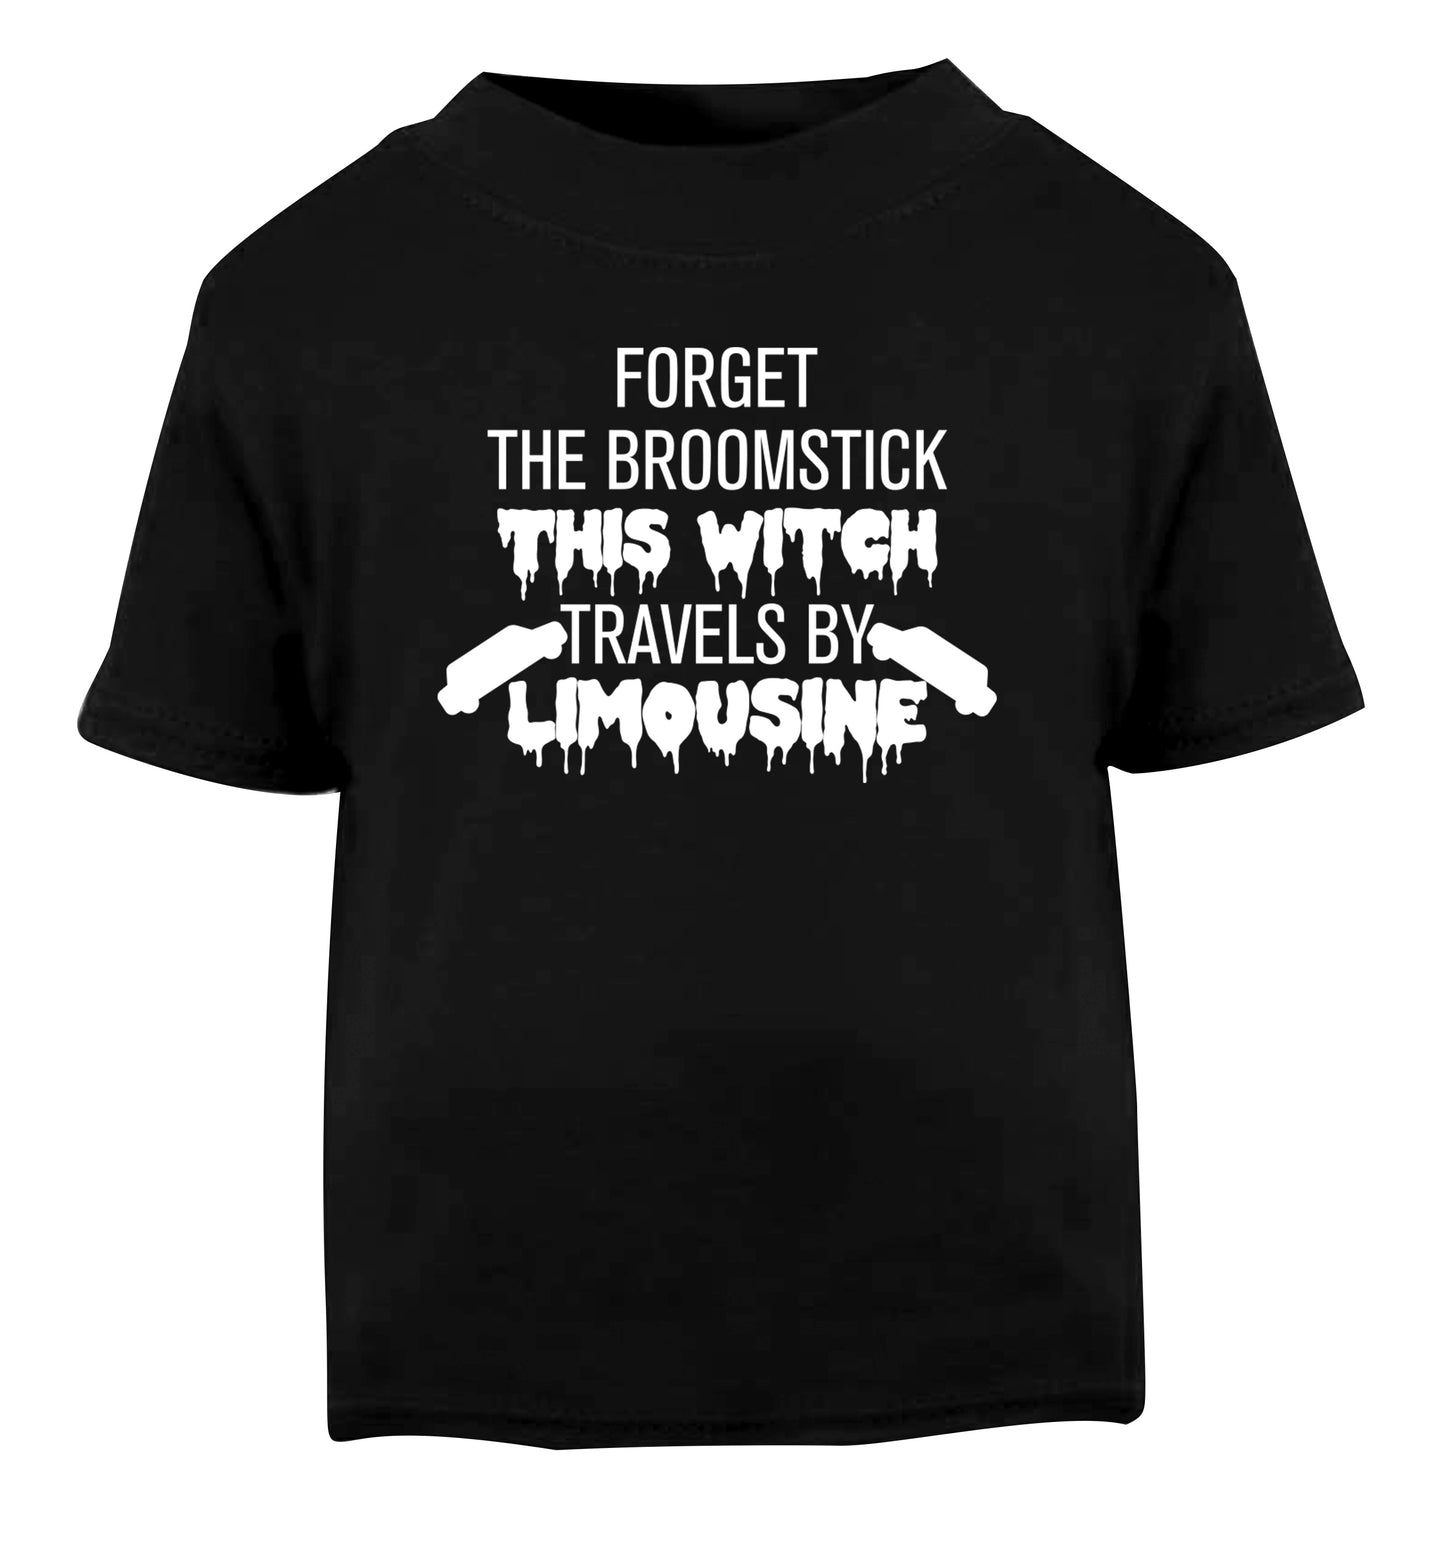 Forget the broomstick this witch travels by limousine Black Baby Toddler Tshirt 2 years